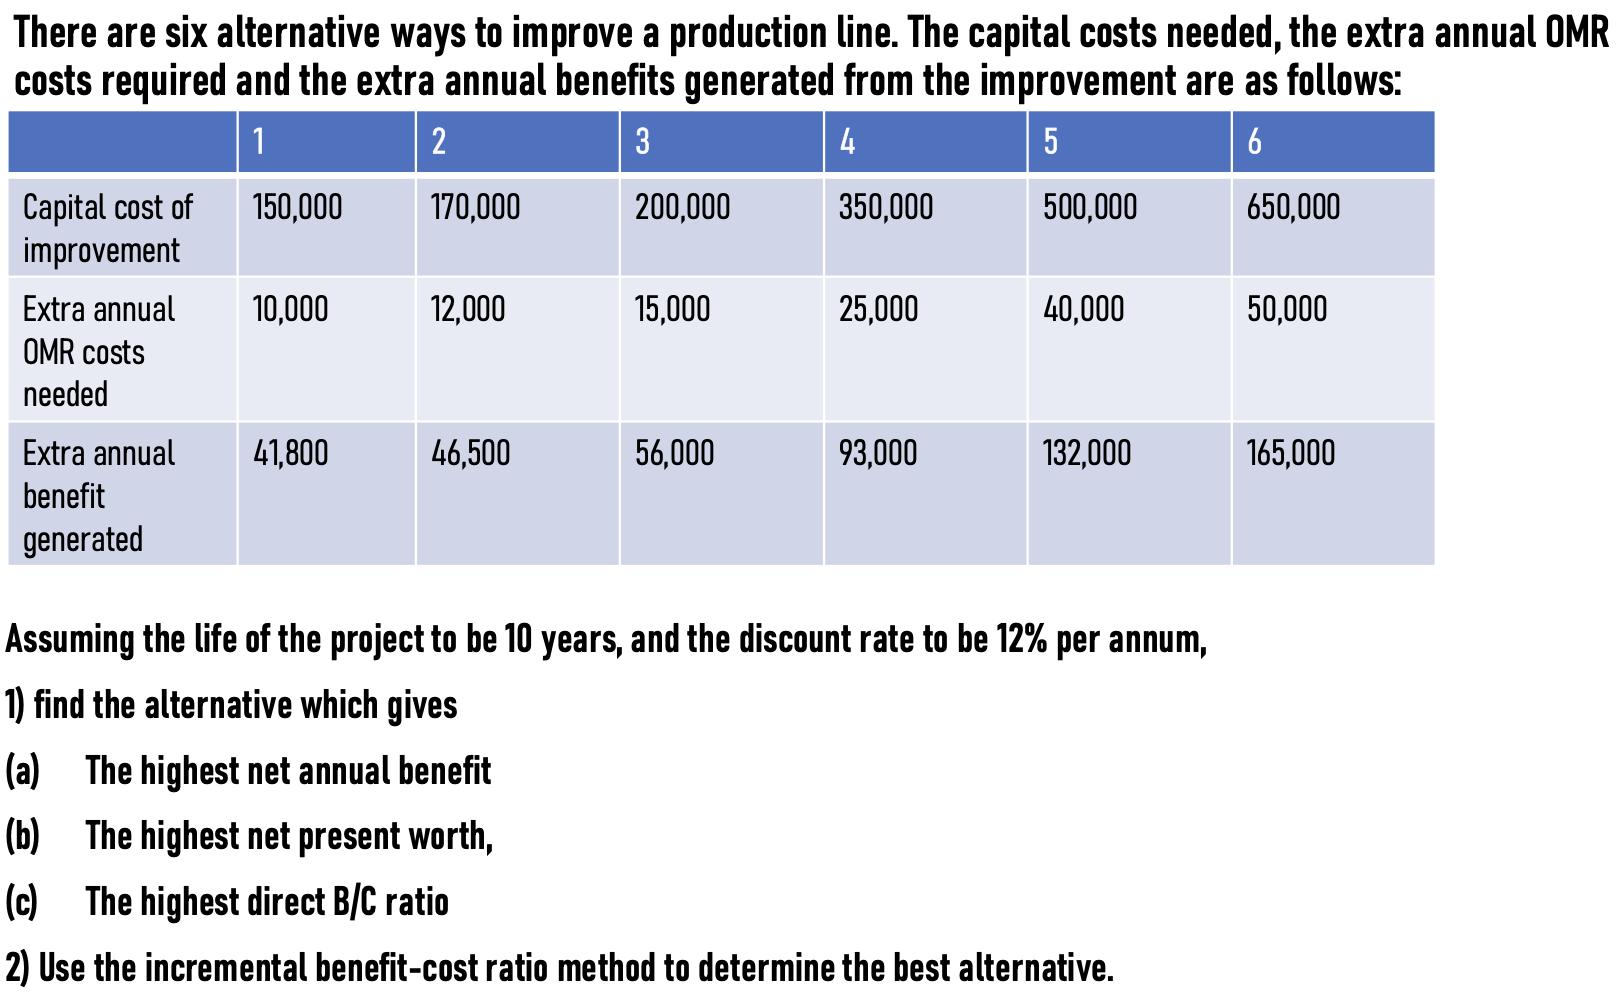 There are six alternative ways to improve a production line. The capital costs needed, the extra annual OMR